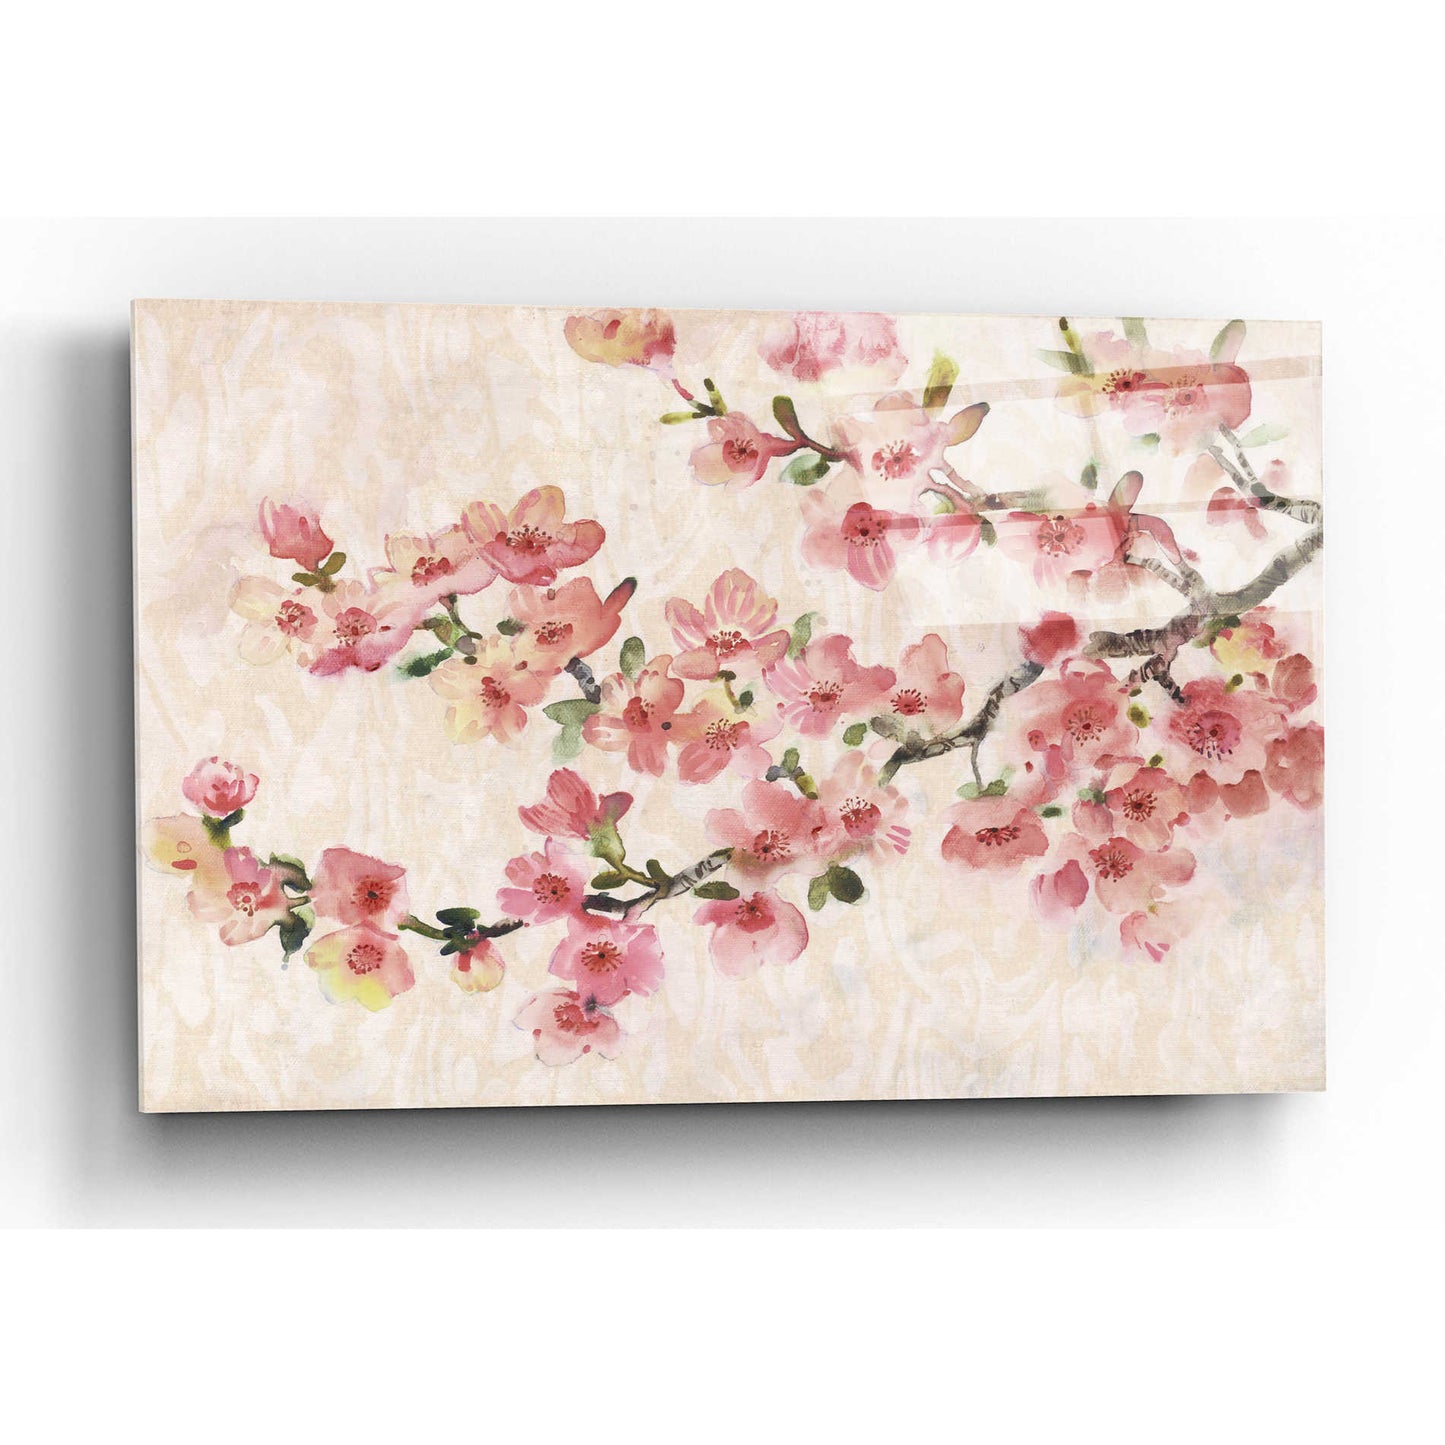 Epic Art 'Cherry Blossom Composition I' by Tim O'Toole, Acrylic Glass Wall Art,16x12